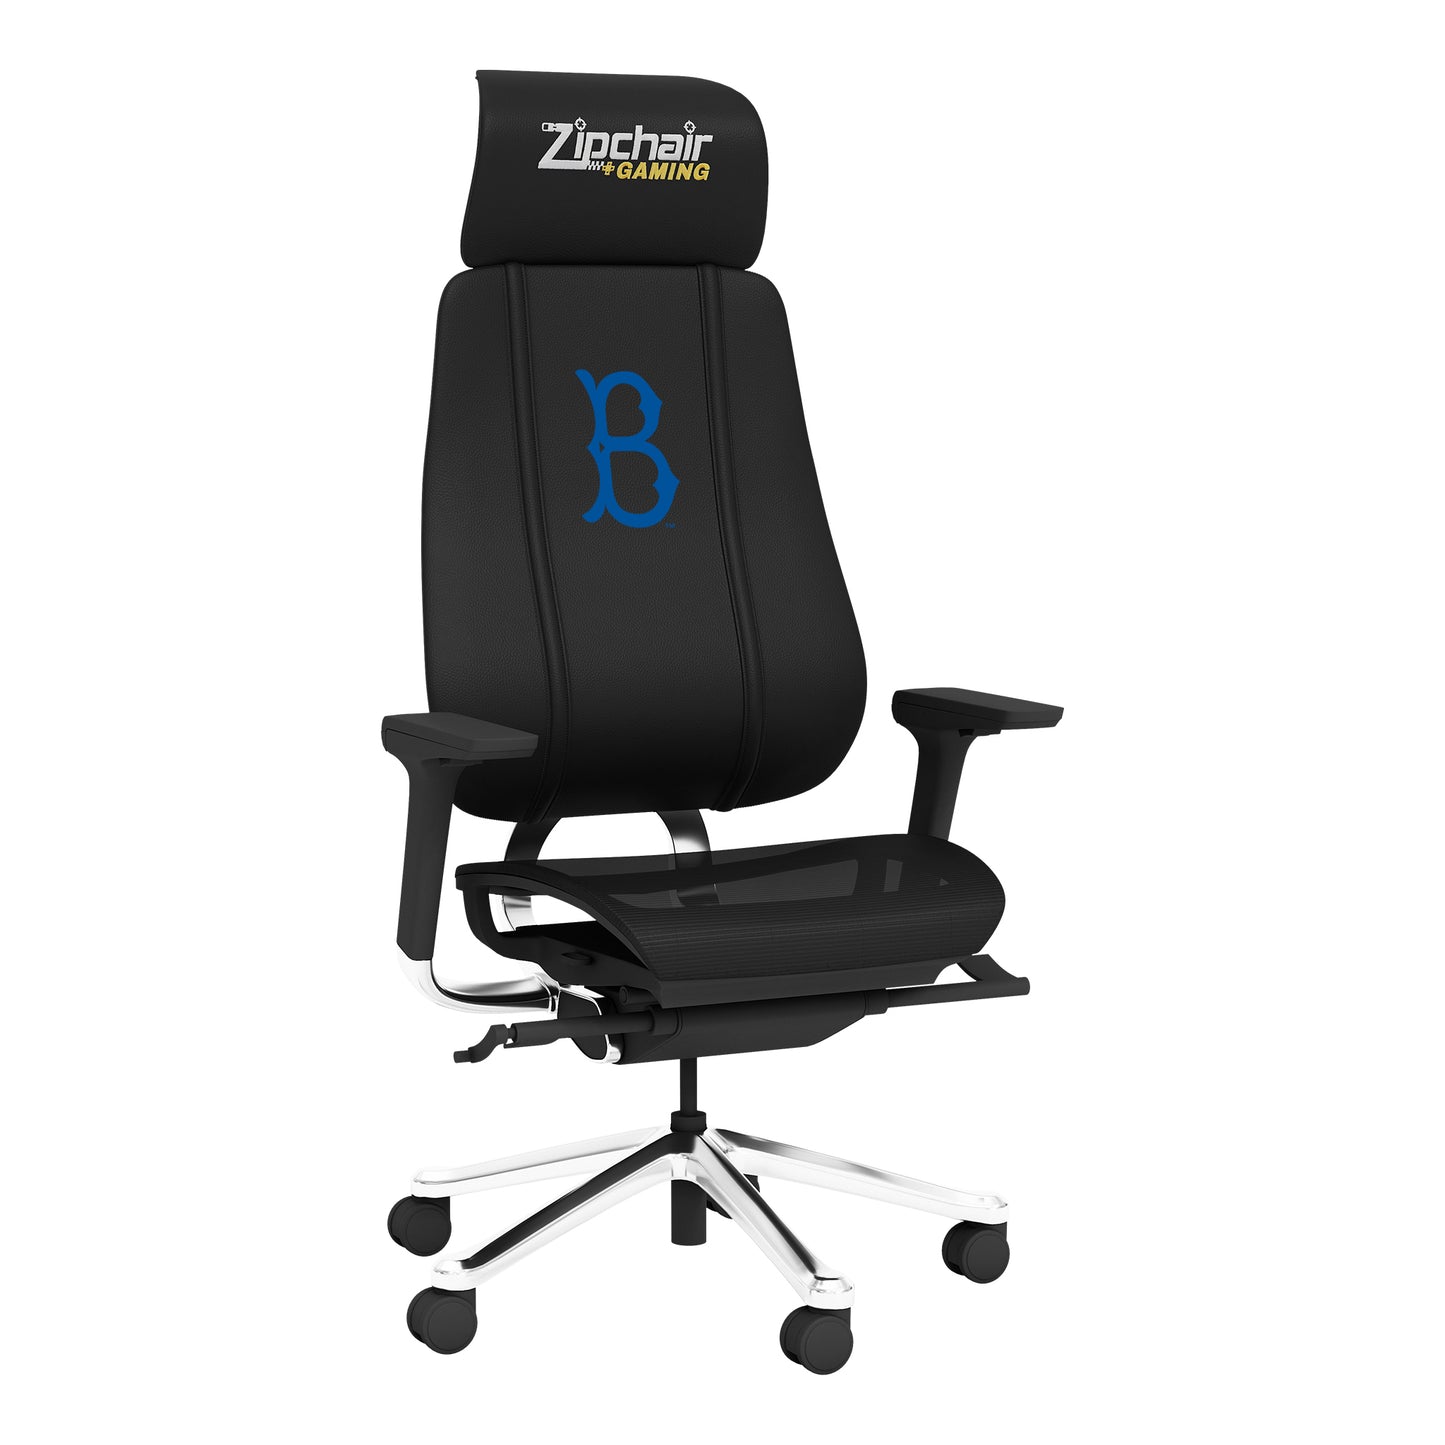 PhantomX Mesh Gaming Chair with Brooklyn Dodgers Cooperstown